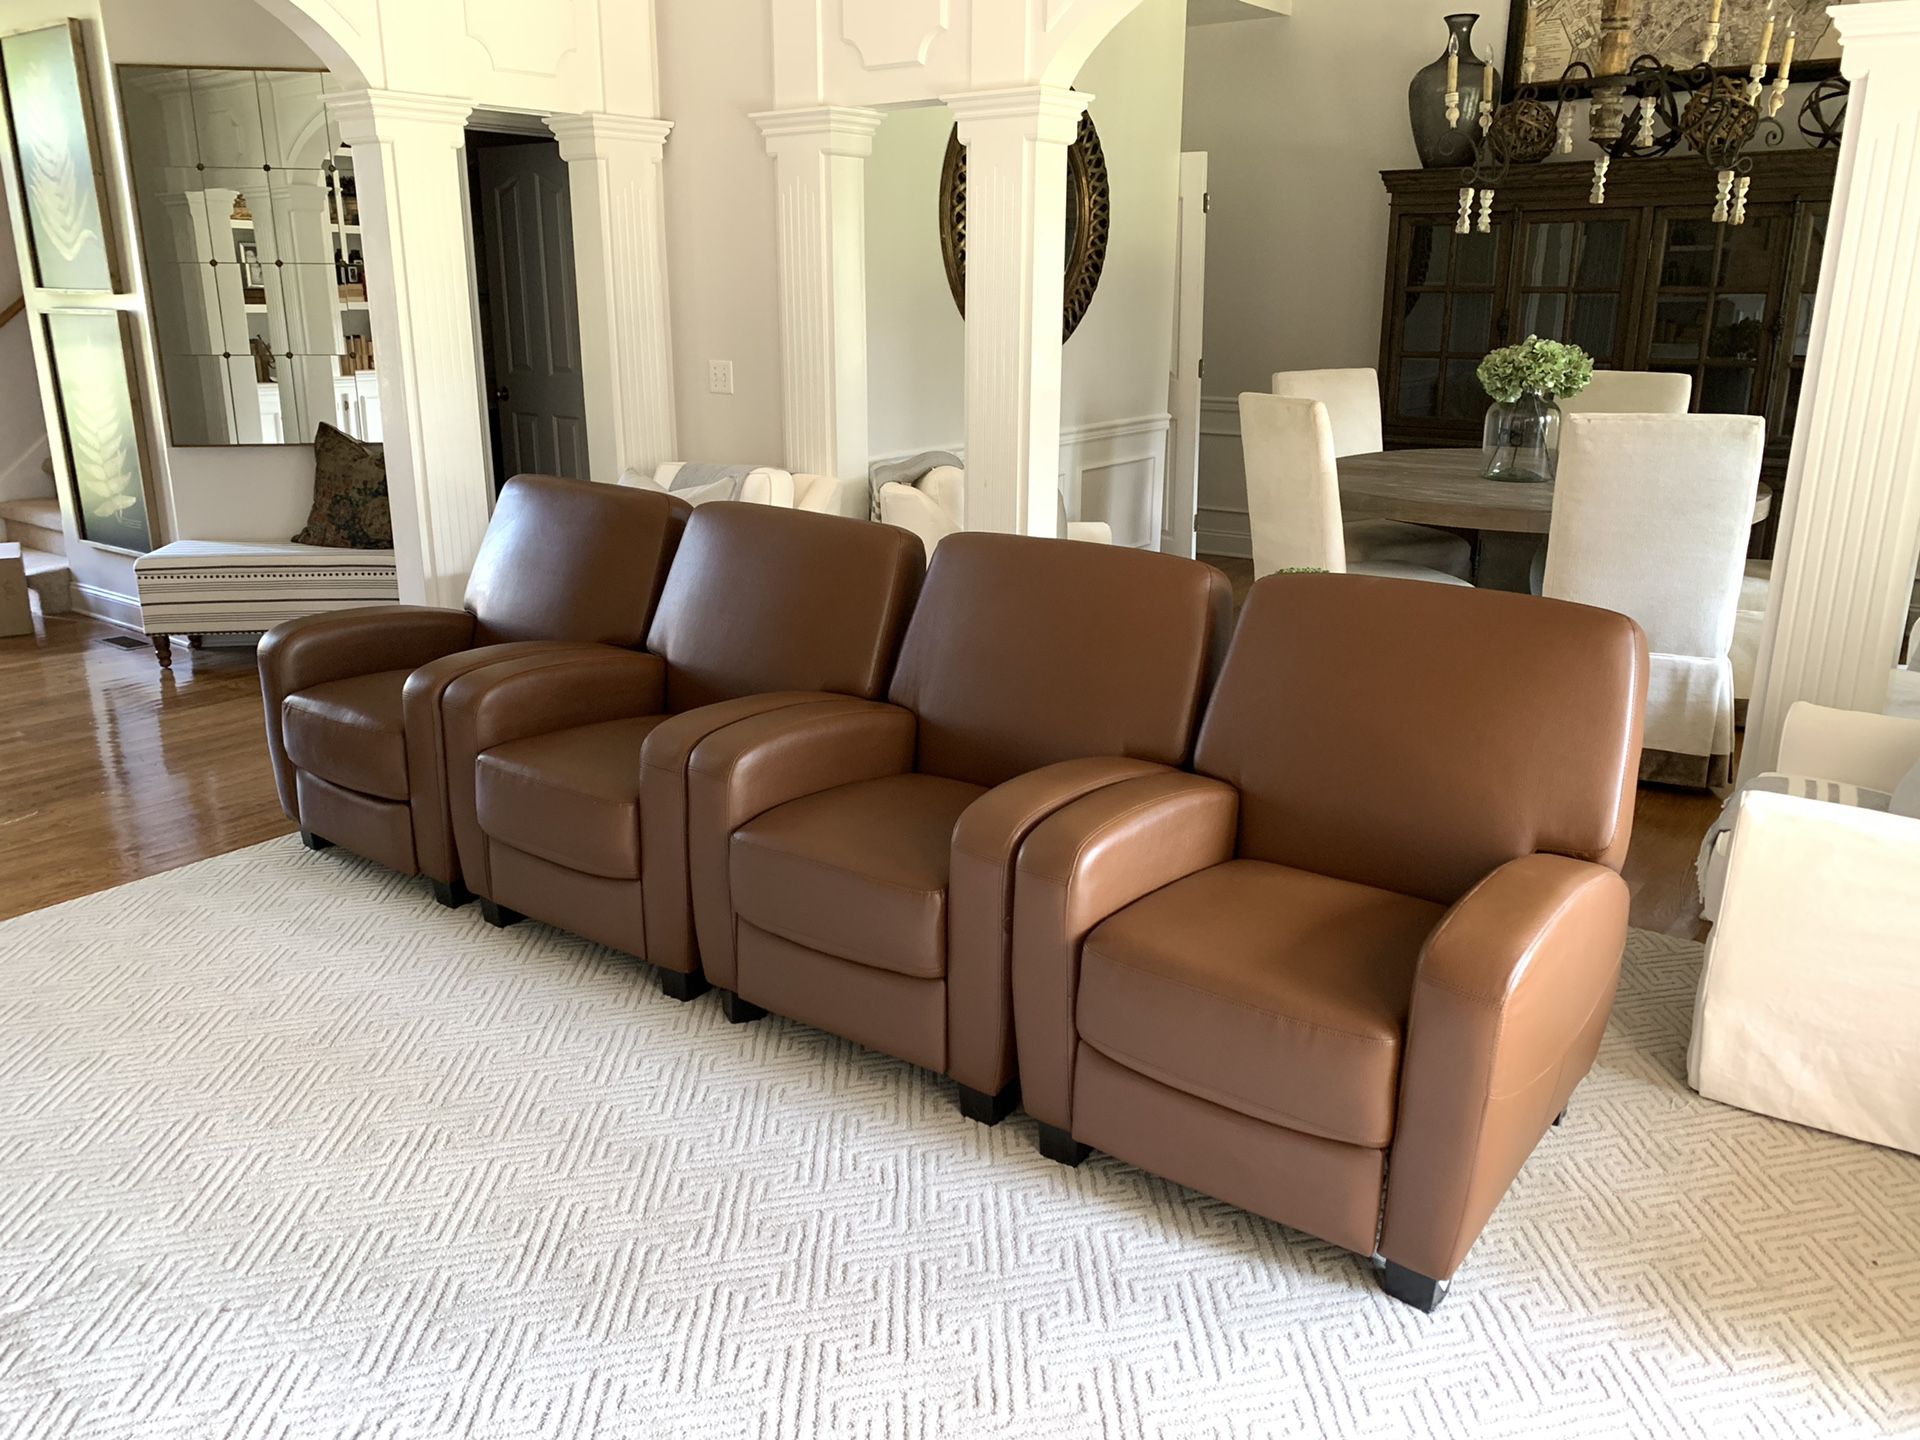 4 Theater Recliner Chairs